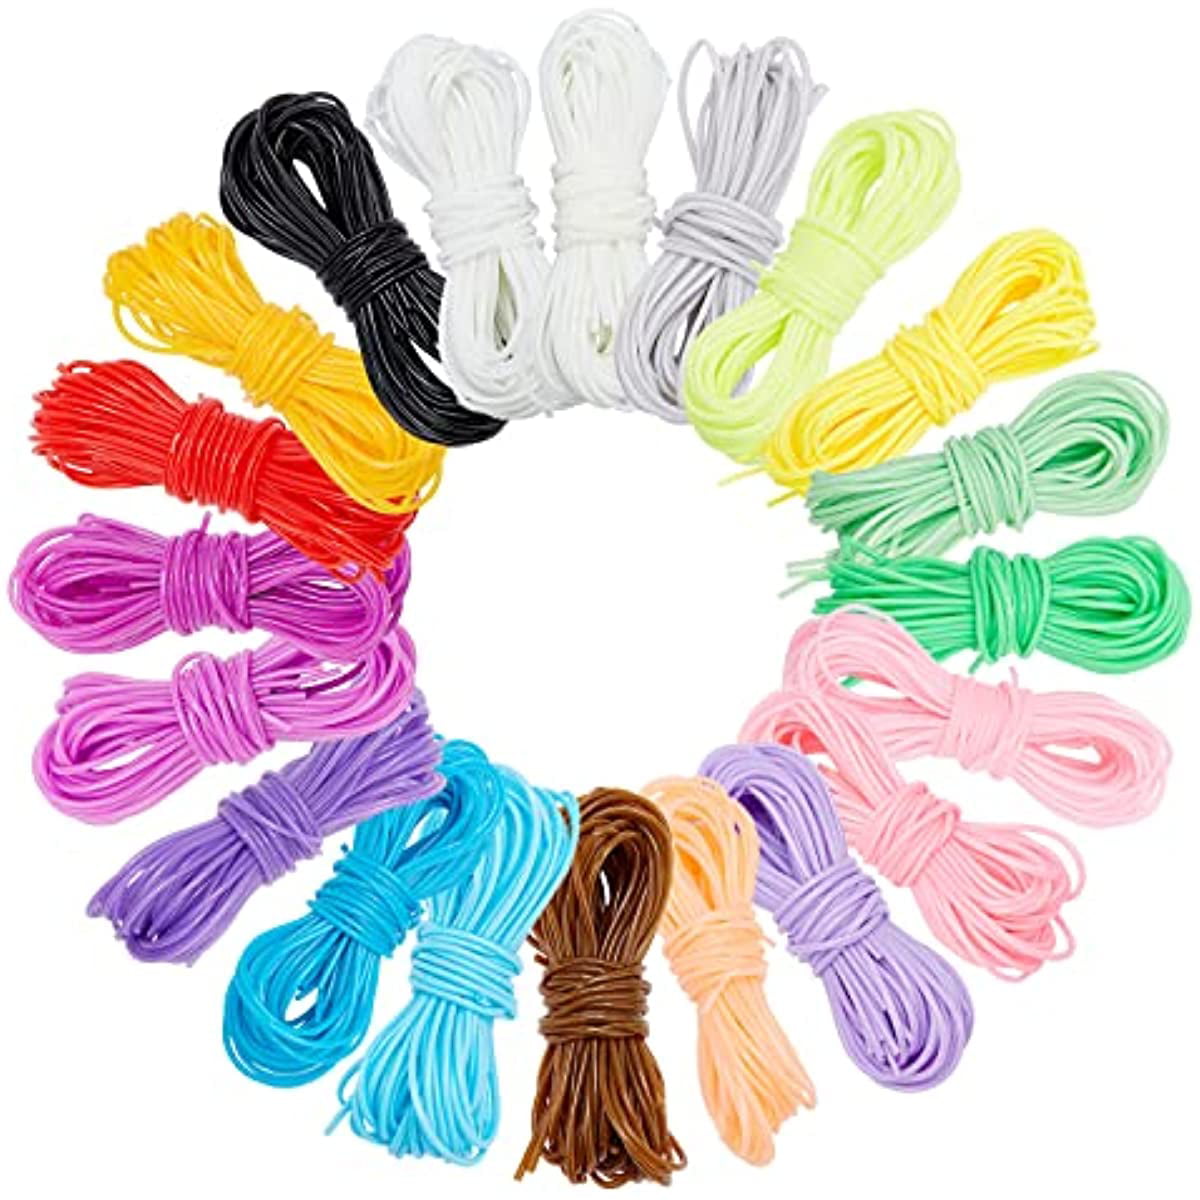 Juvale 10 Spools 50 Yards Each Of Plastic Lanyard String, Gimp String In 10  Neon Colors For Bracelets, Necklaces, Boondoggle Keychains, Lanyard Cord :  Target